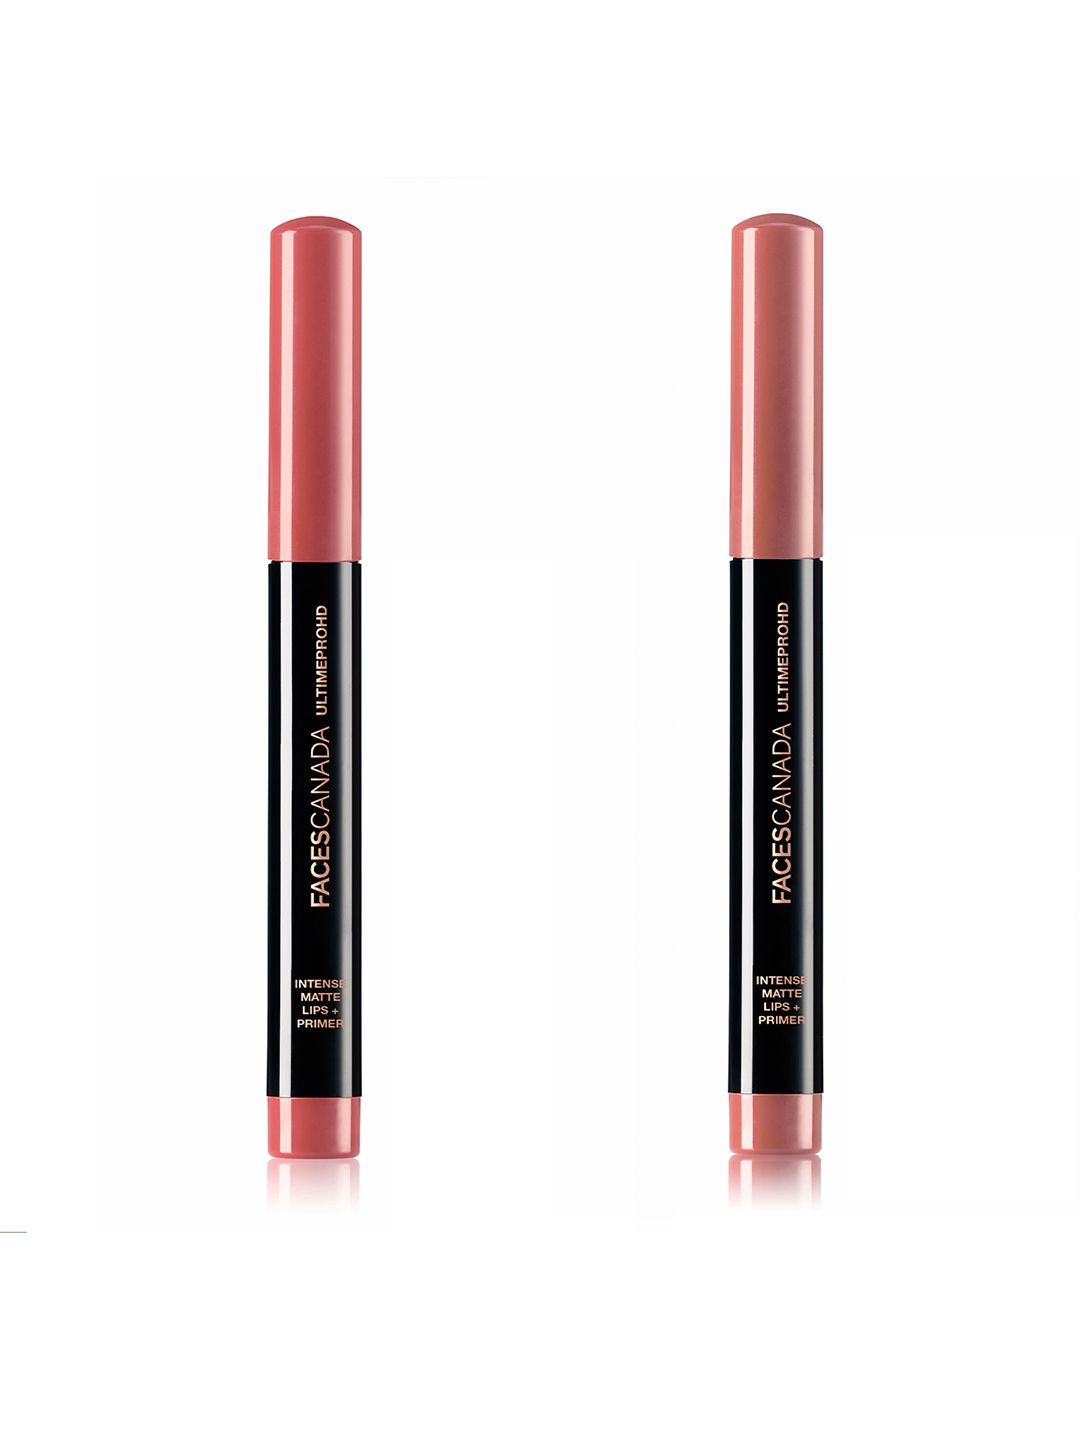 FACES CANADA Set of 2 UltimePro HD Intense Matte Lipsticks Price in India